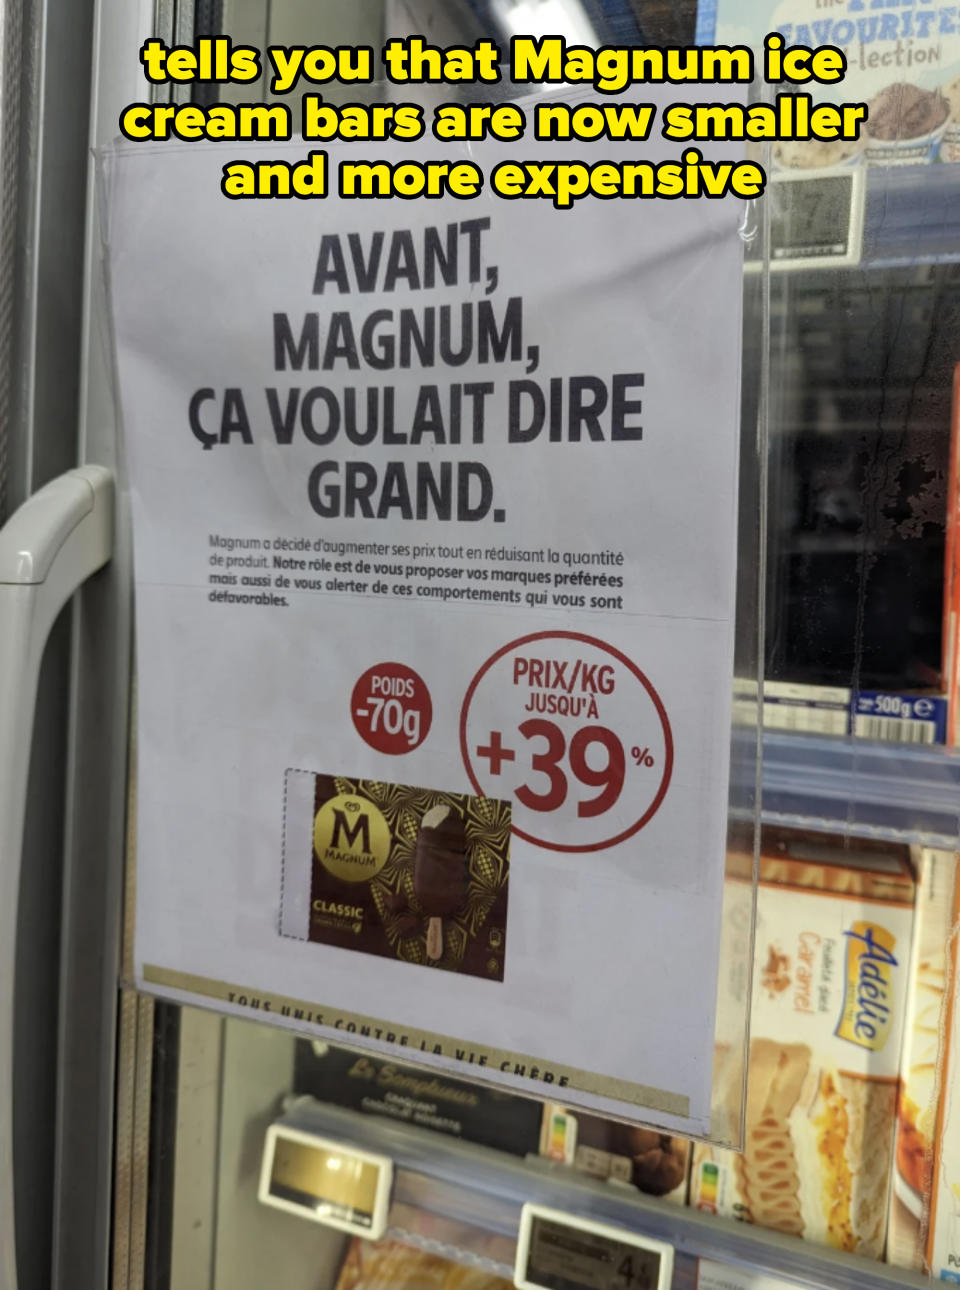 Advertisement for Magnum Classic ice cream showing increased product size with "+39%" highlighted, next to a freezer